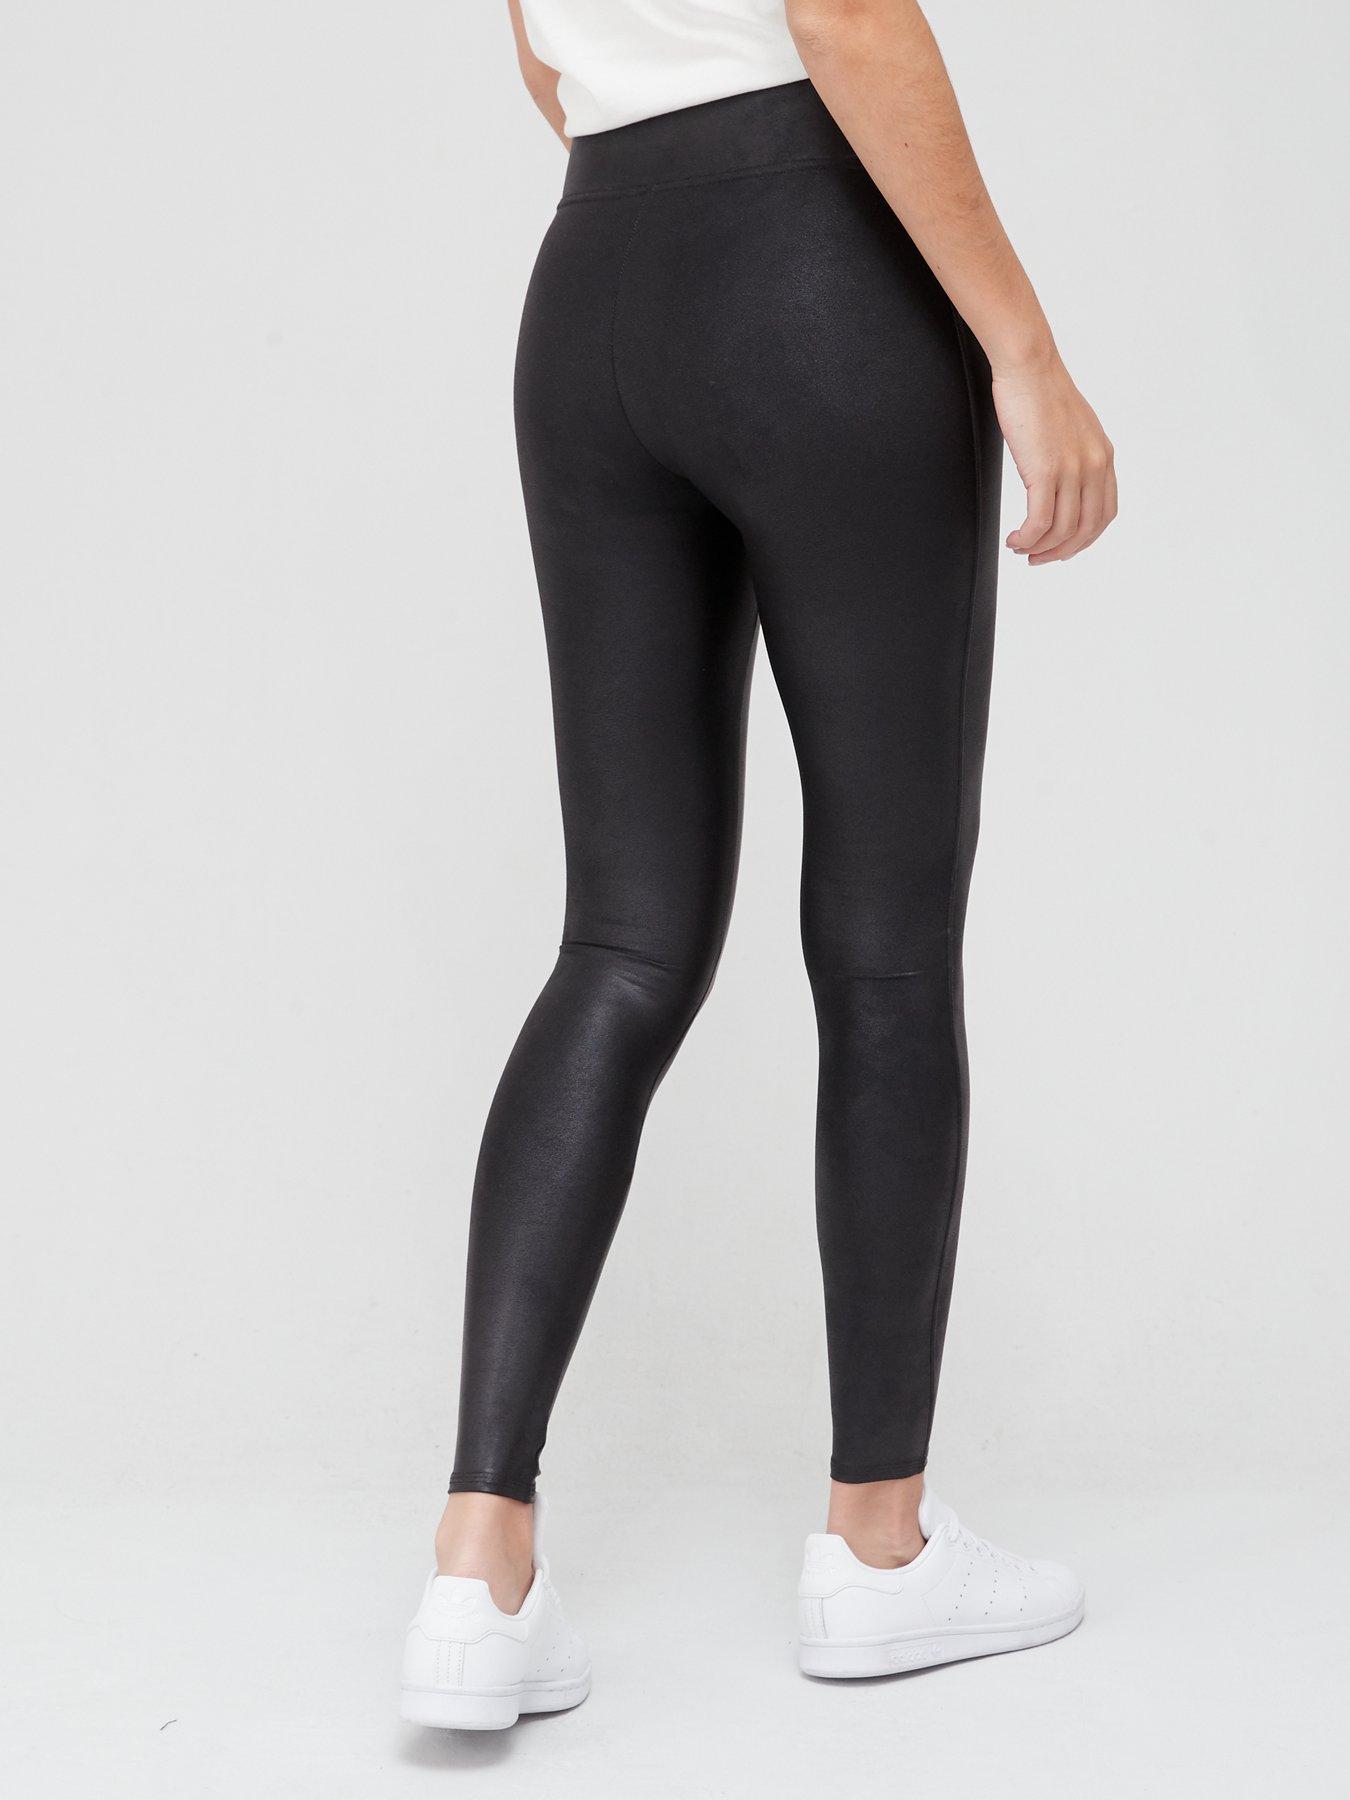 Curvy faux Leather Leggings with 30% discount!